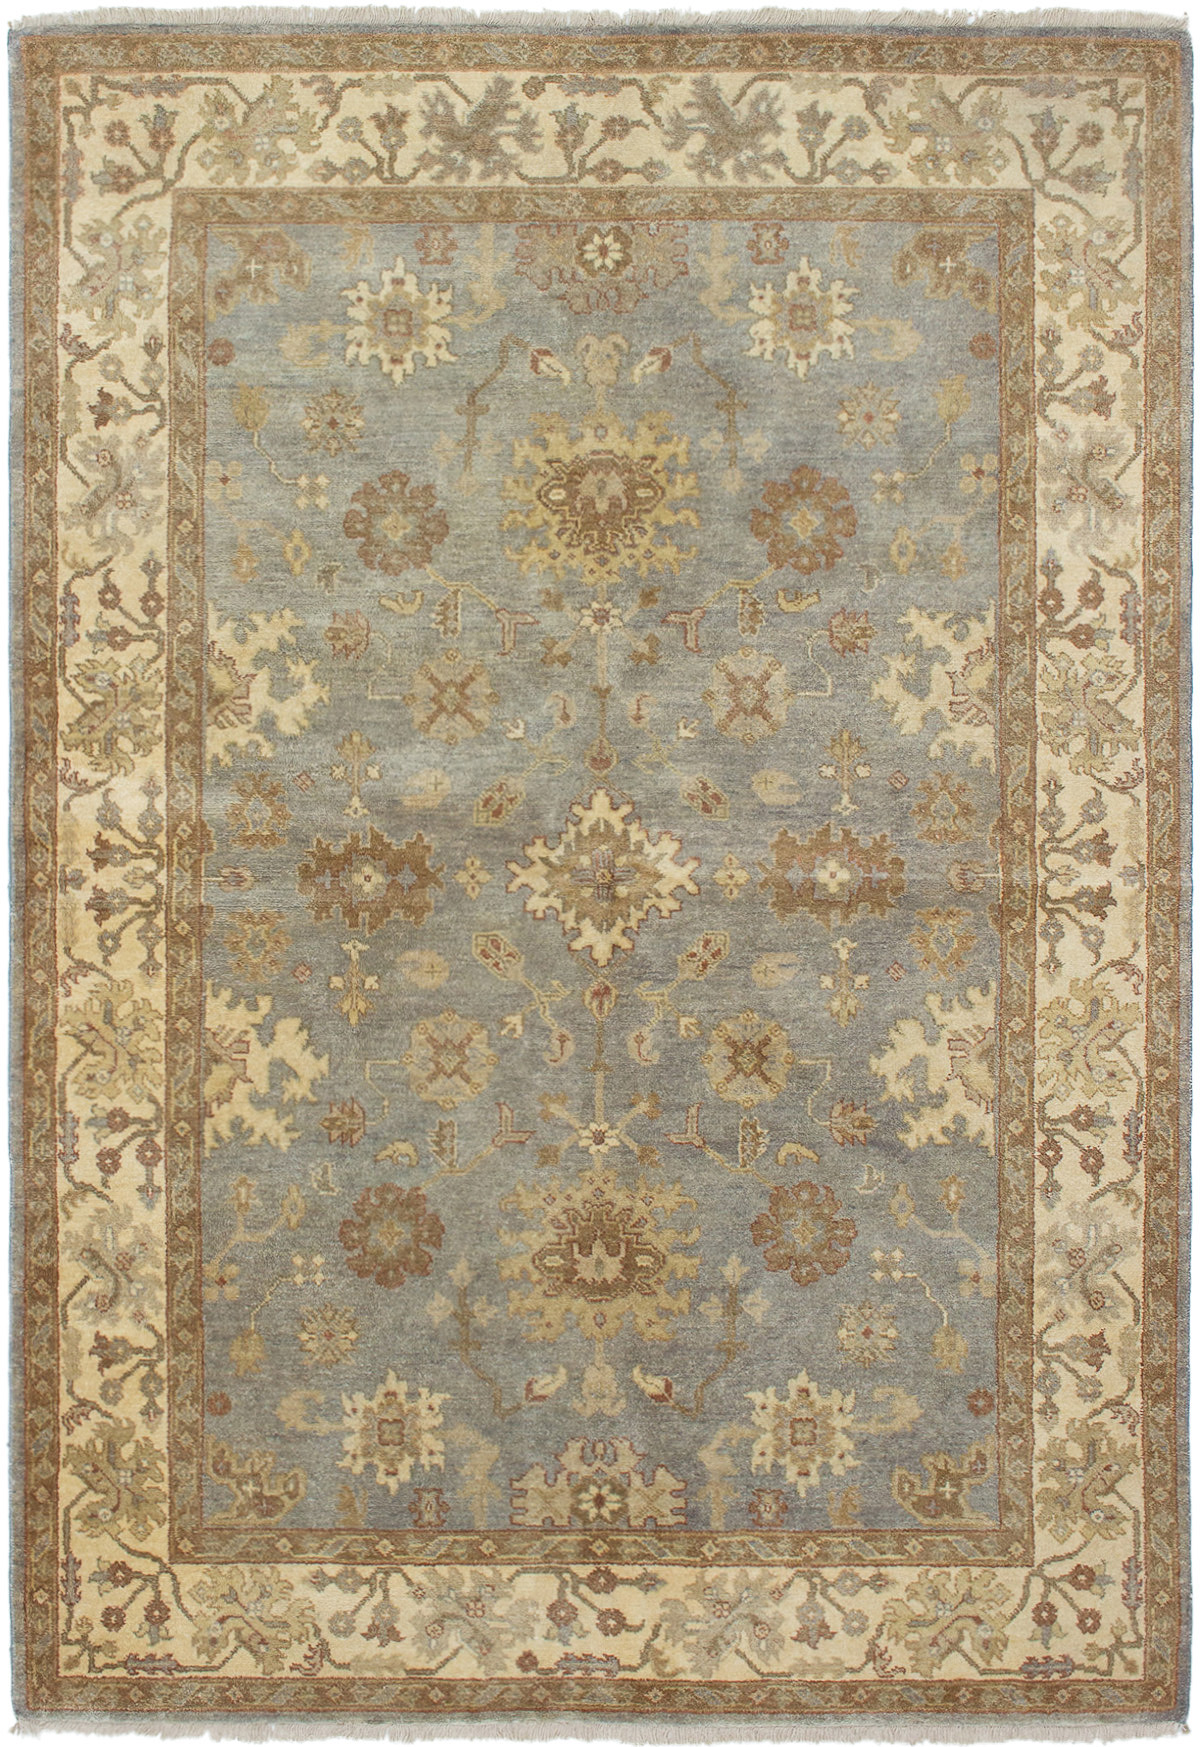 Hand-knotted Chobi Finest Grey Wool Rug 6'3" x 9'4" Size: 6'3" x 9'4"  